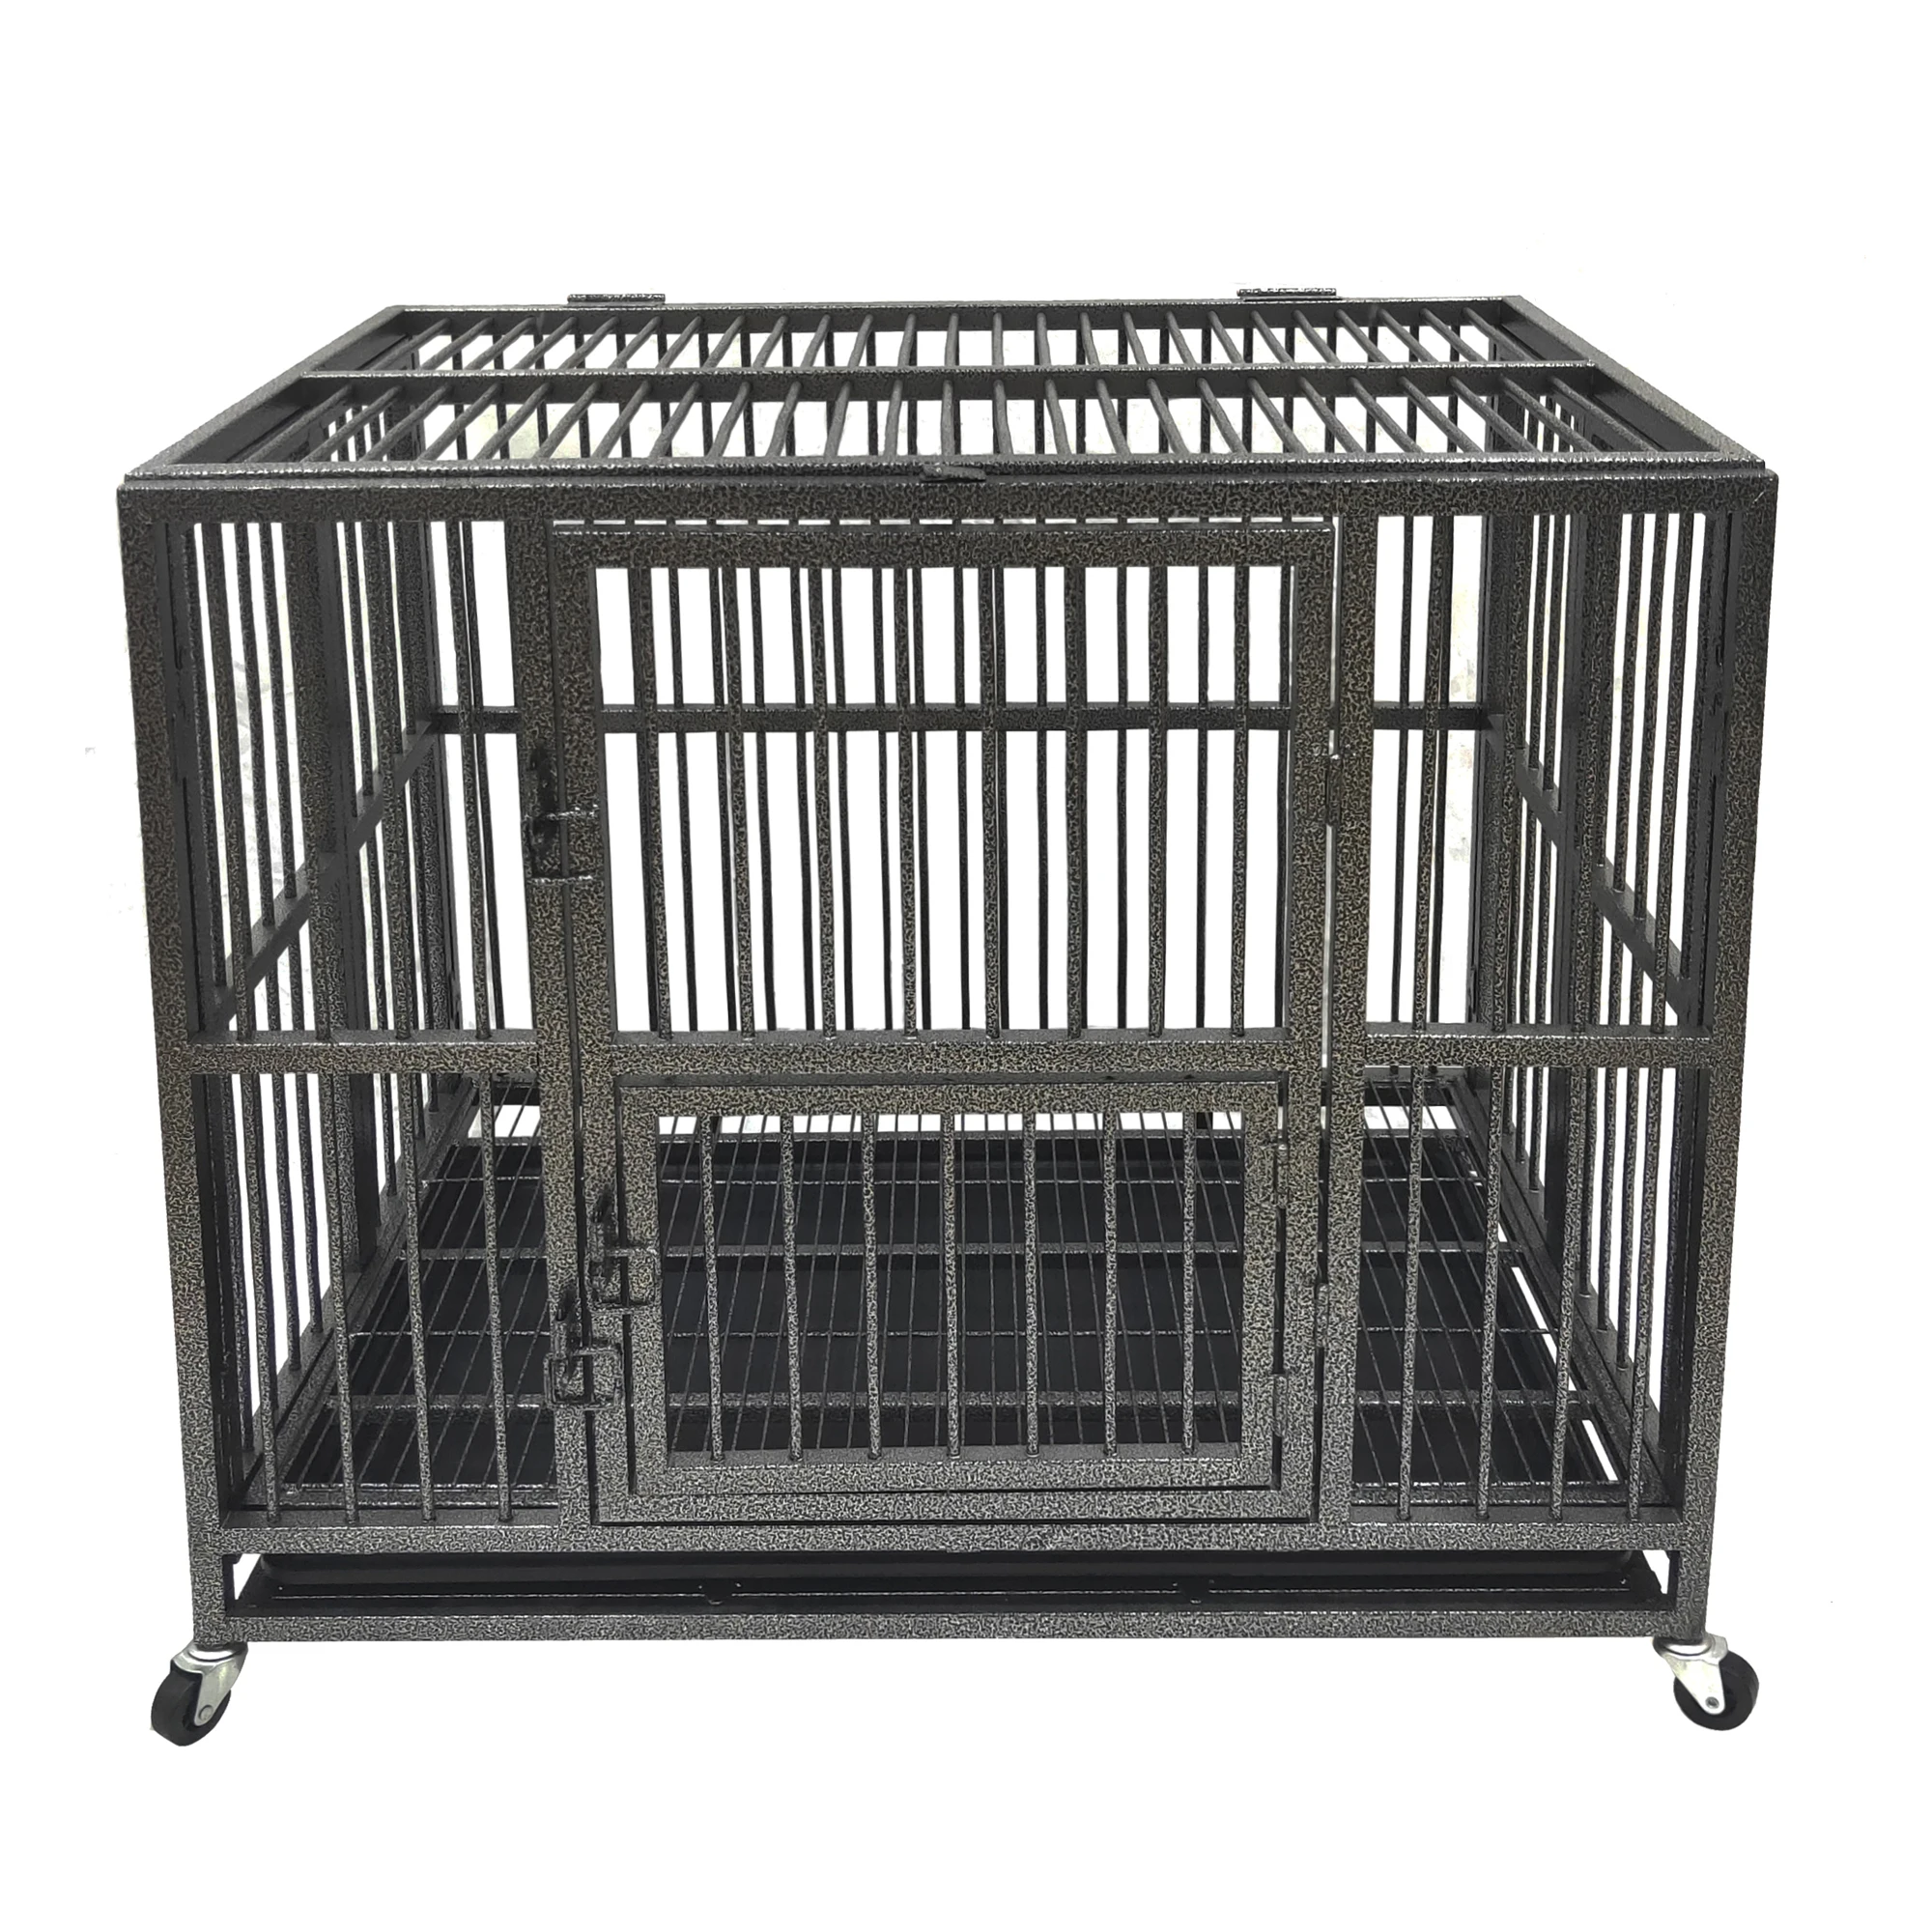 

37" Metal Large Strong Heavy Duty Rolling Wholesale Pet Kennel Dog Cages Crates With Removable Tray for Indoor Outdoor